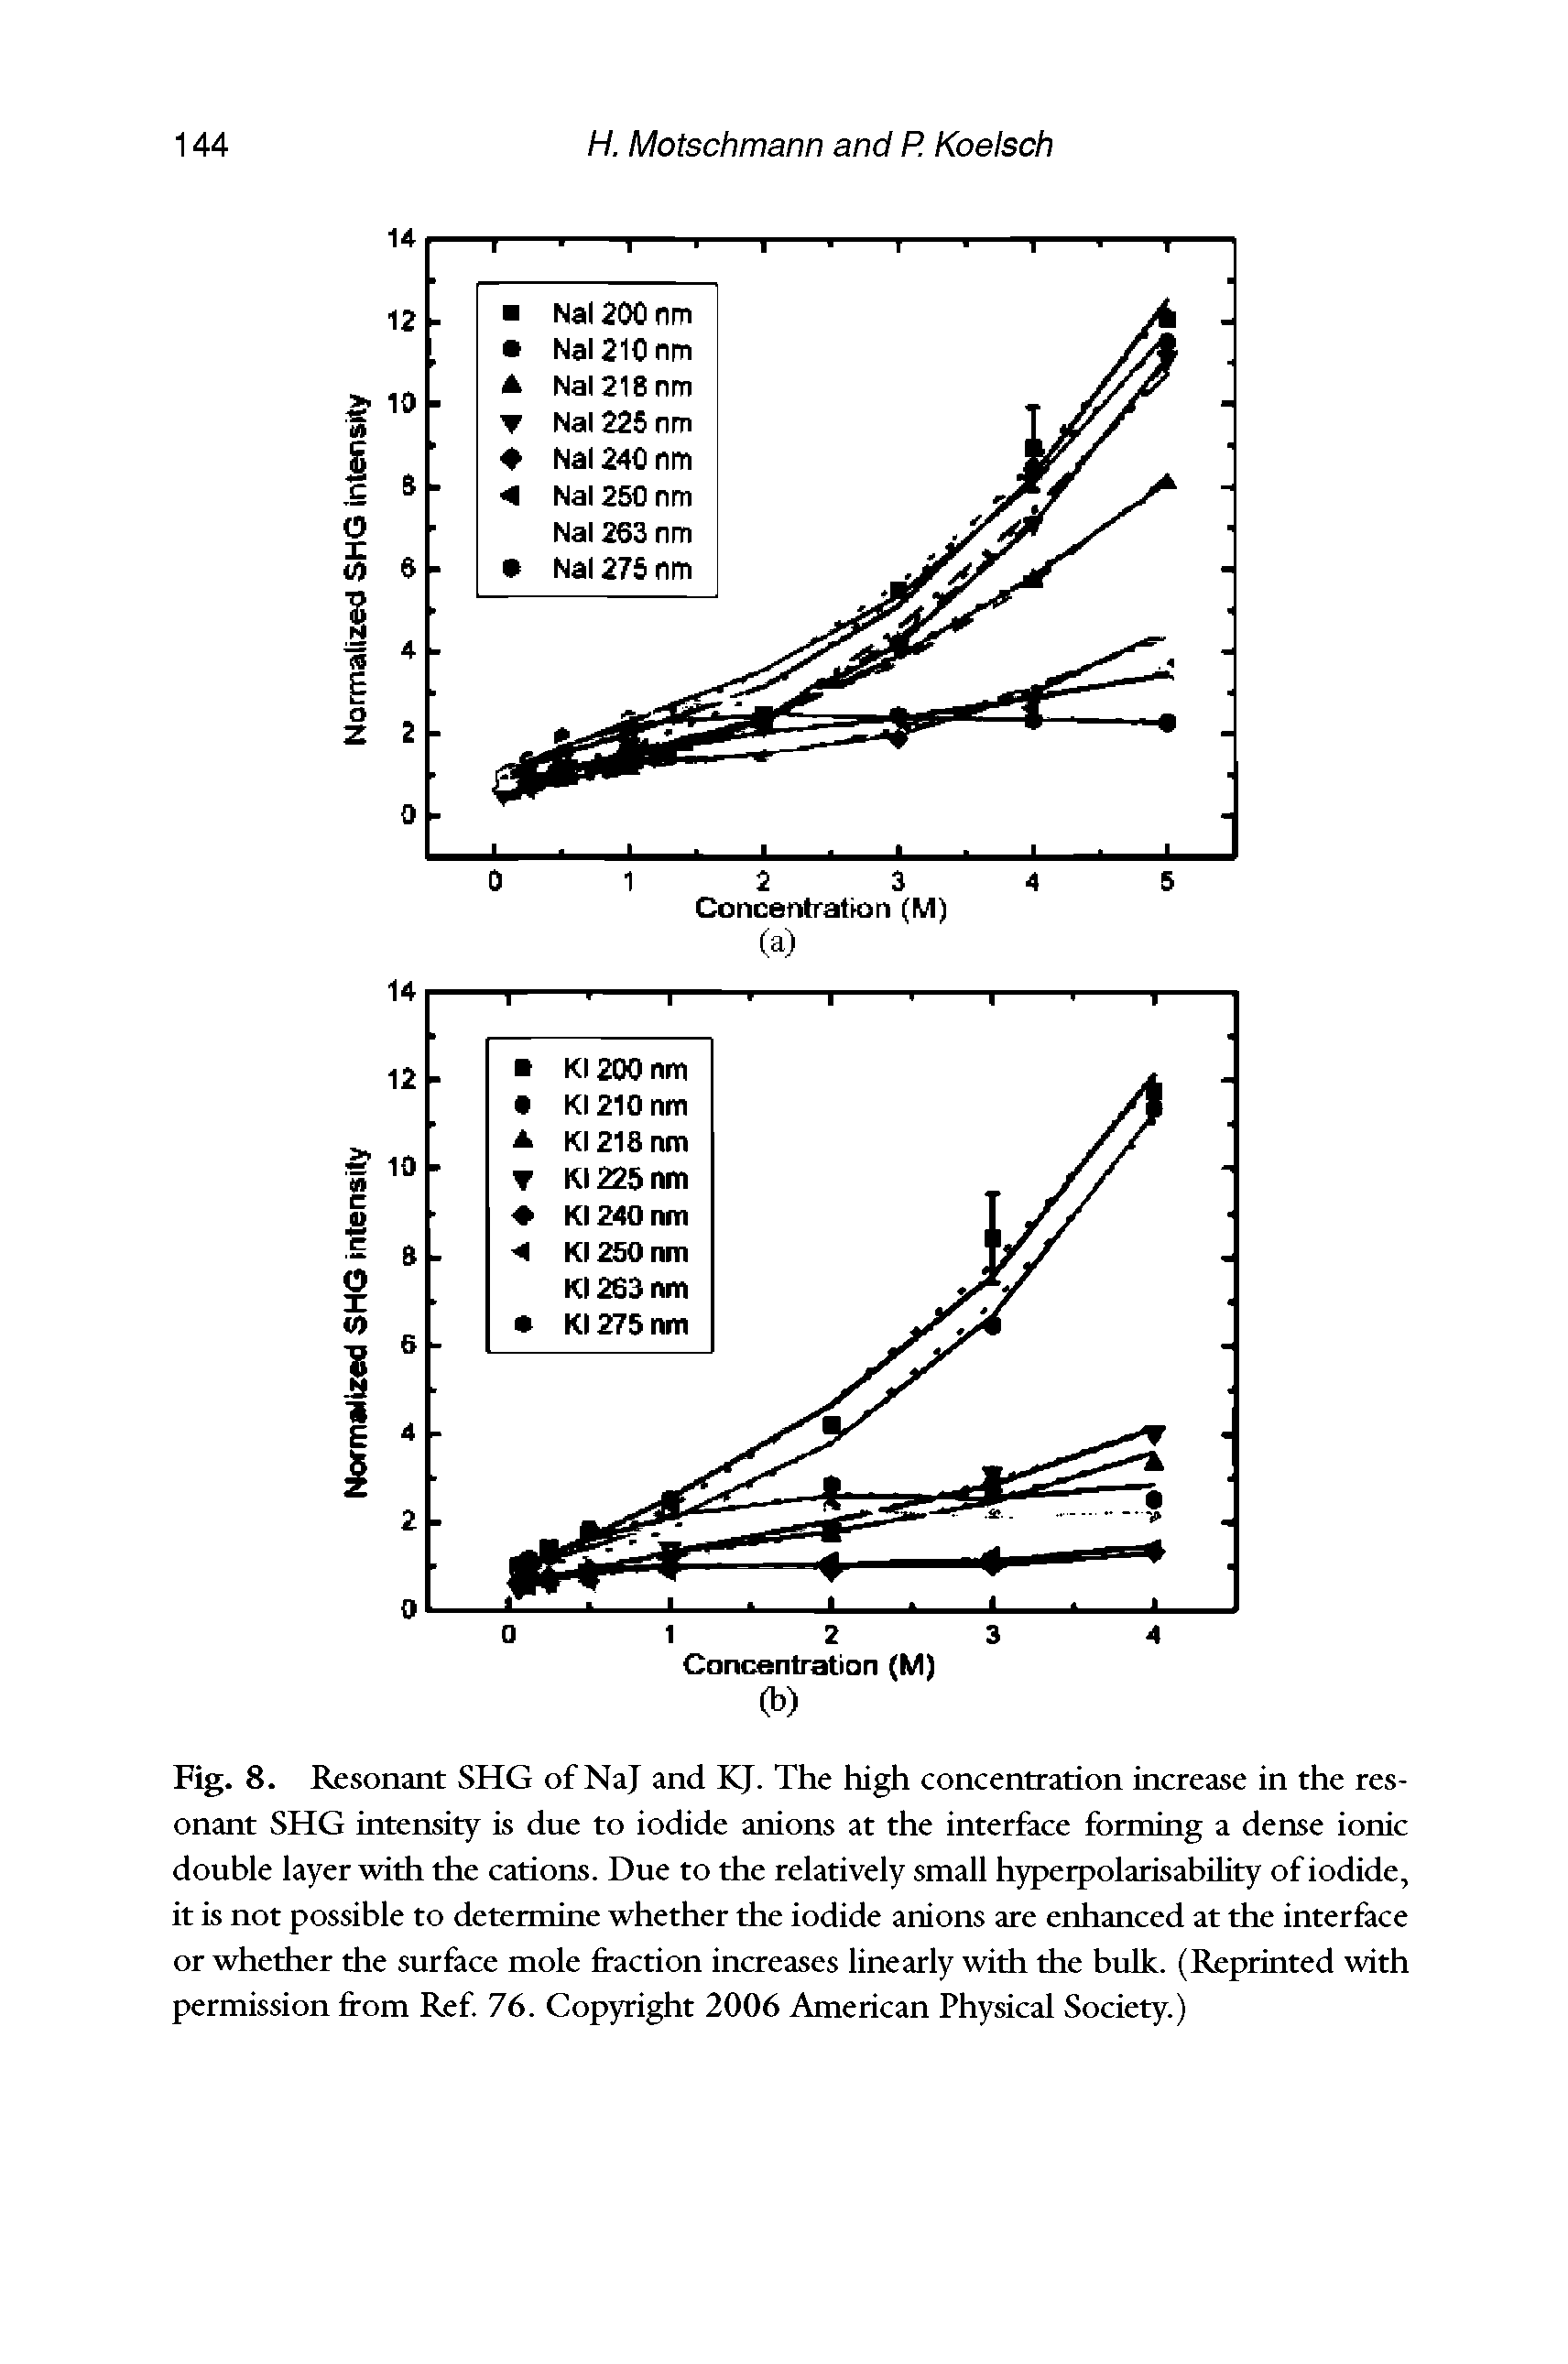 Fig. 8. Resonant SHG of NaJ and KJ. The high concentration increase in the resonant SHG intensity is due to iodide anions at the interface forming a dense ionic double layer with the cations. Due to the relatively small hyperpolarisability of iodide, it is not possible to determine whether the iodide anions are enhanced at the interface or whether the surfece mole fraction increases linearly with the bulk. (Reprinted with permission from Ref 76. CopyTight 2006 American Physical Society.)...